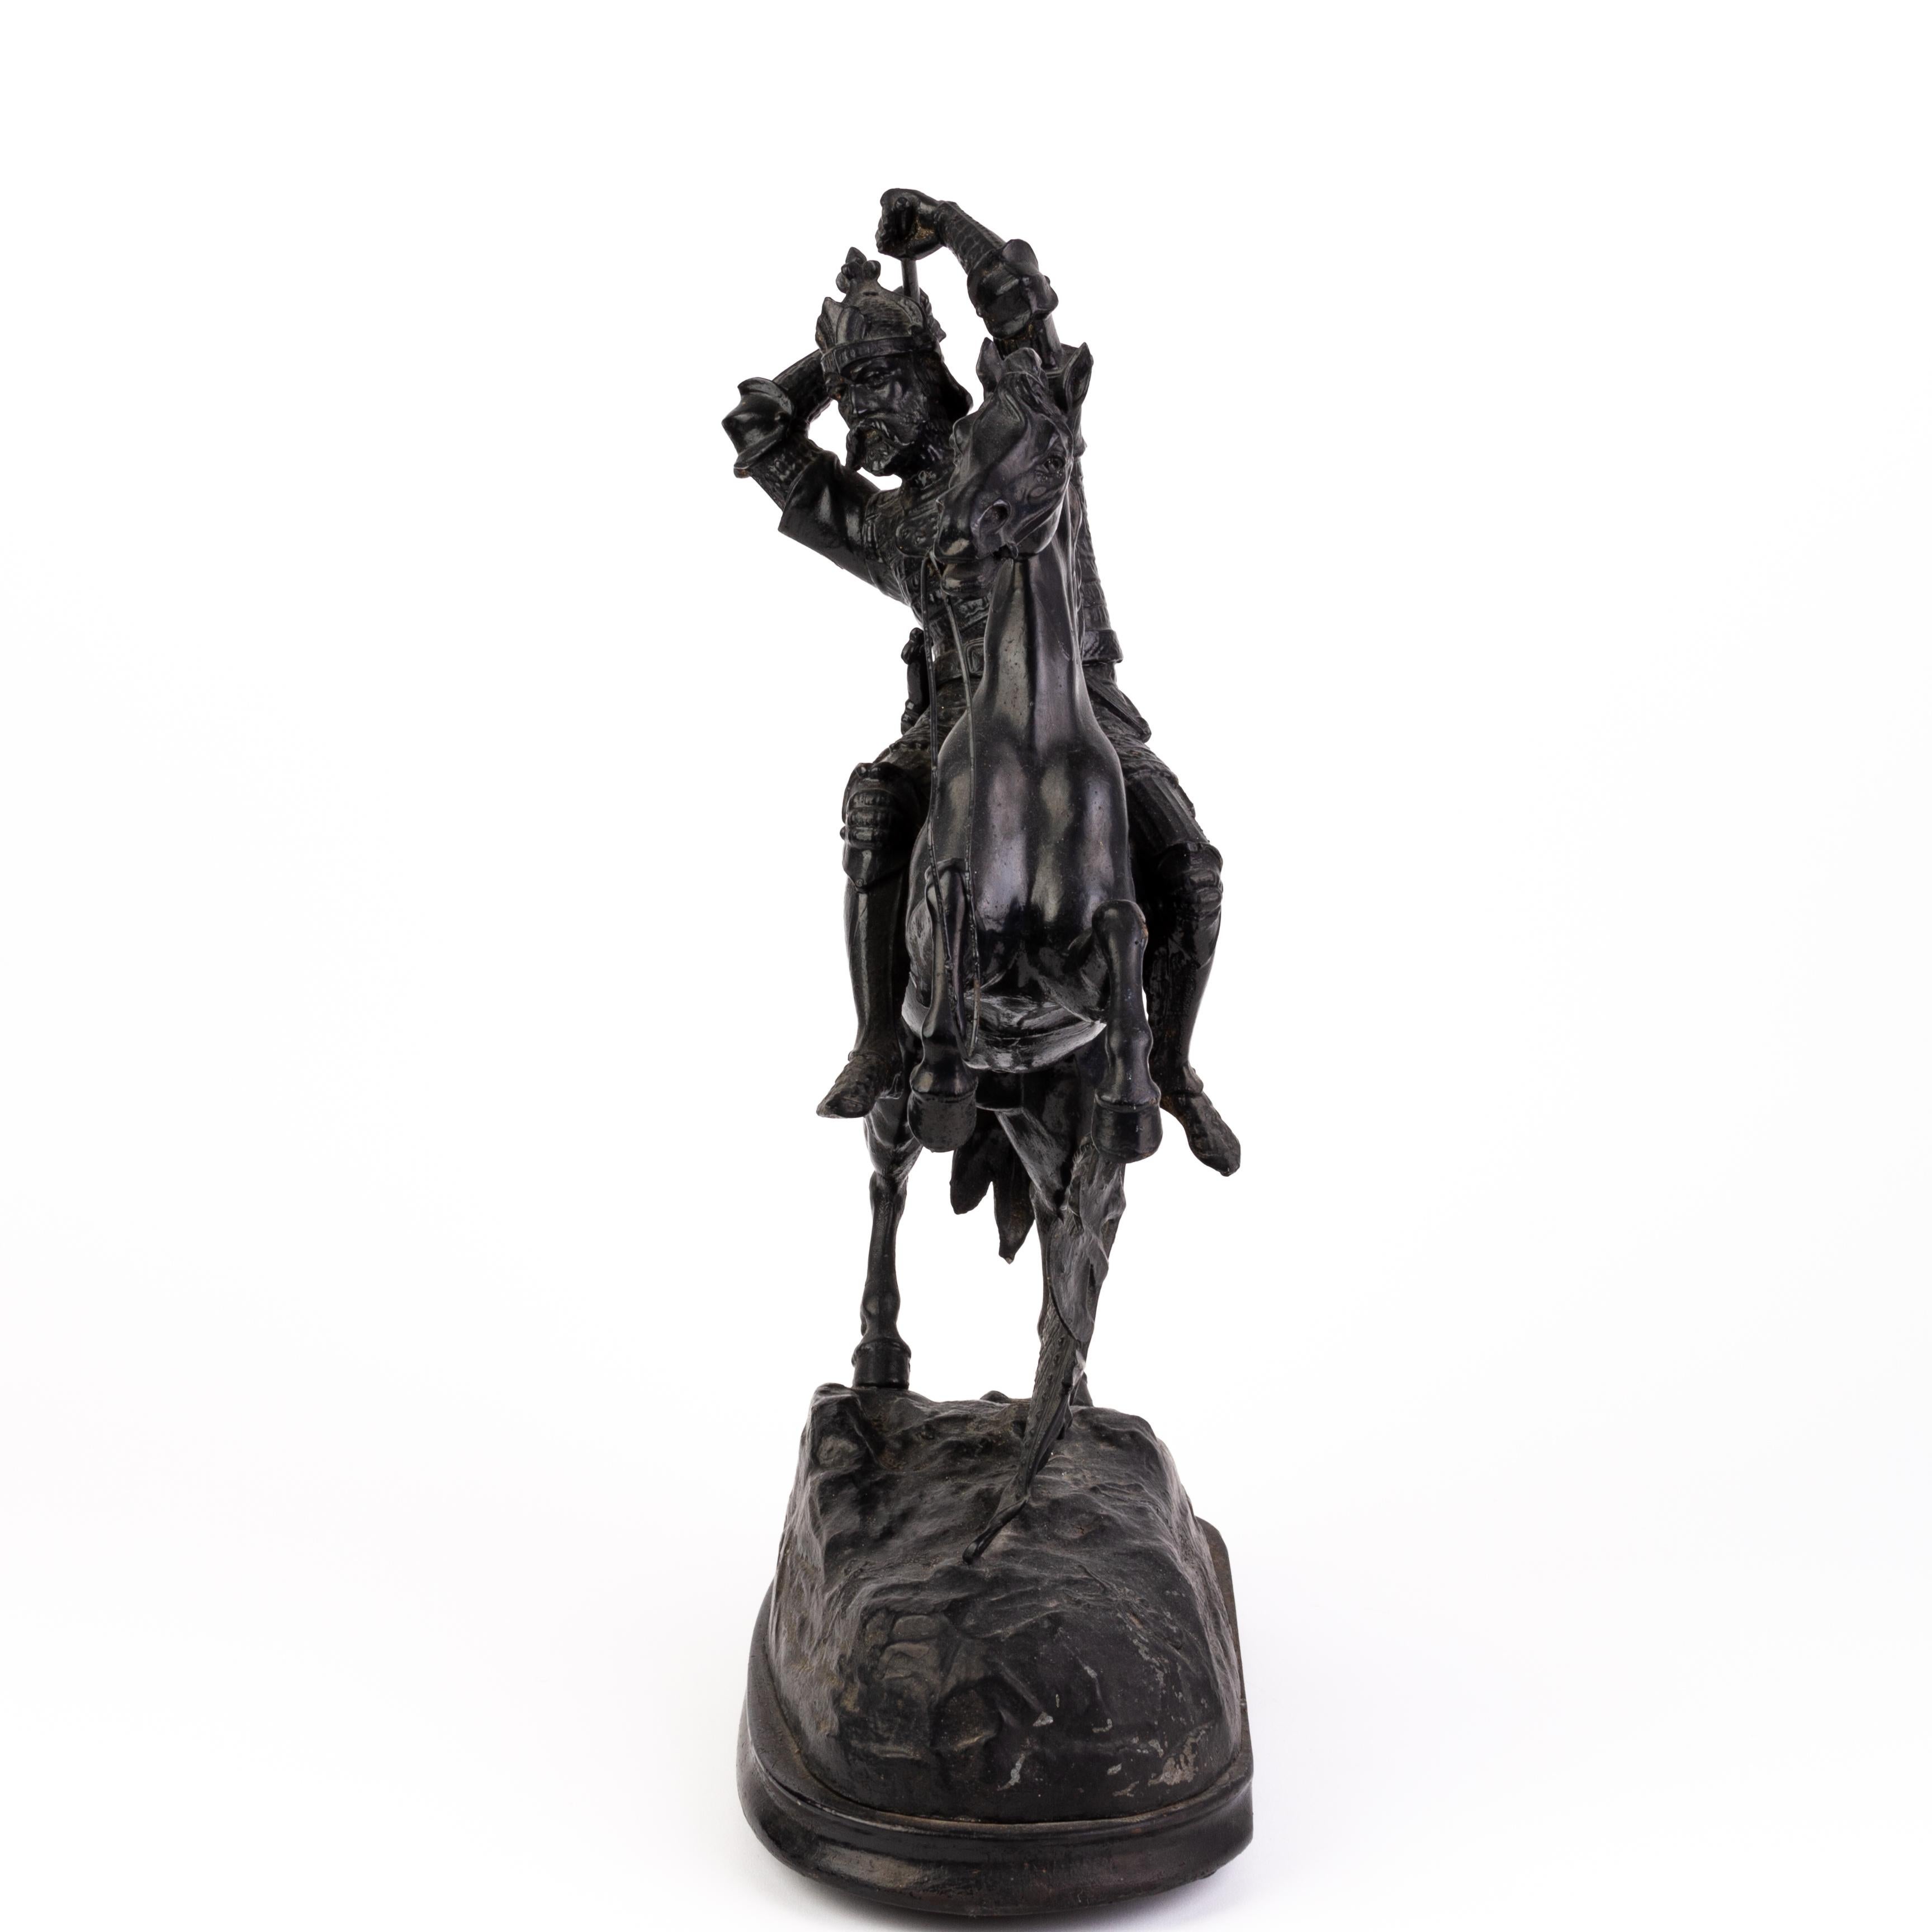 Cast Spelter Sculpture of Knight on Rearing Horse 19th Century 
Good condition overall
From a private collection.
Free international shipping.